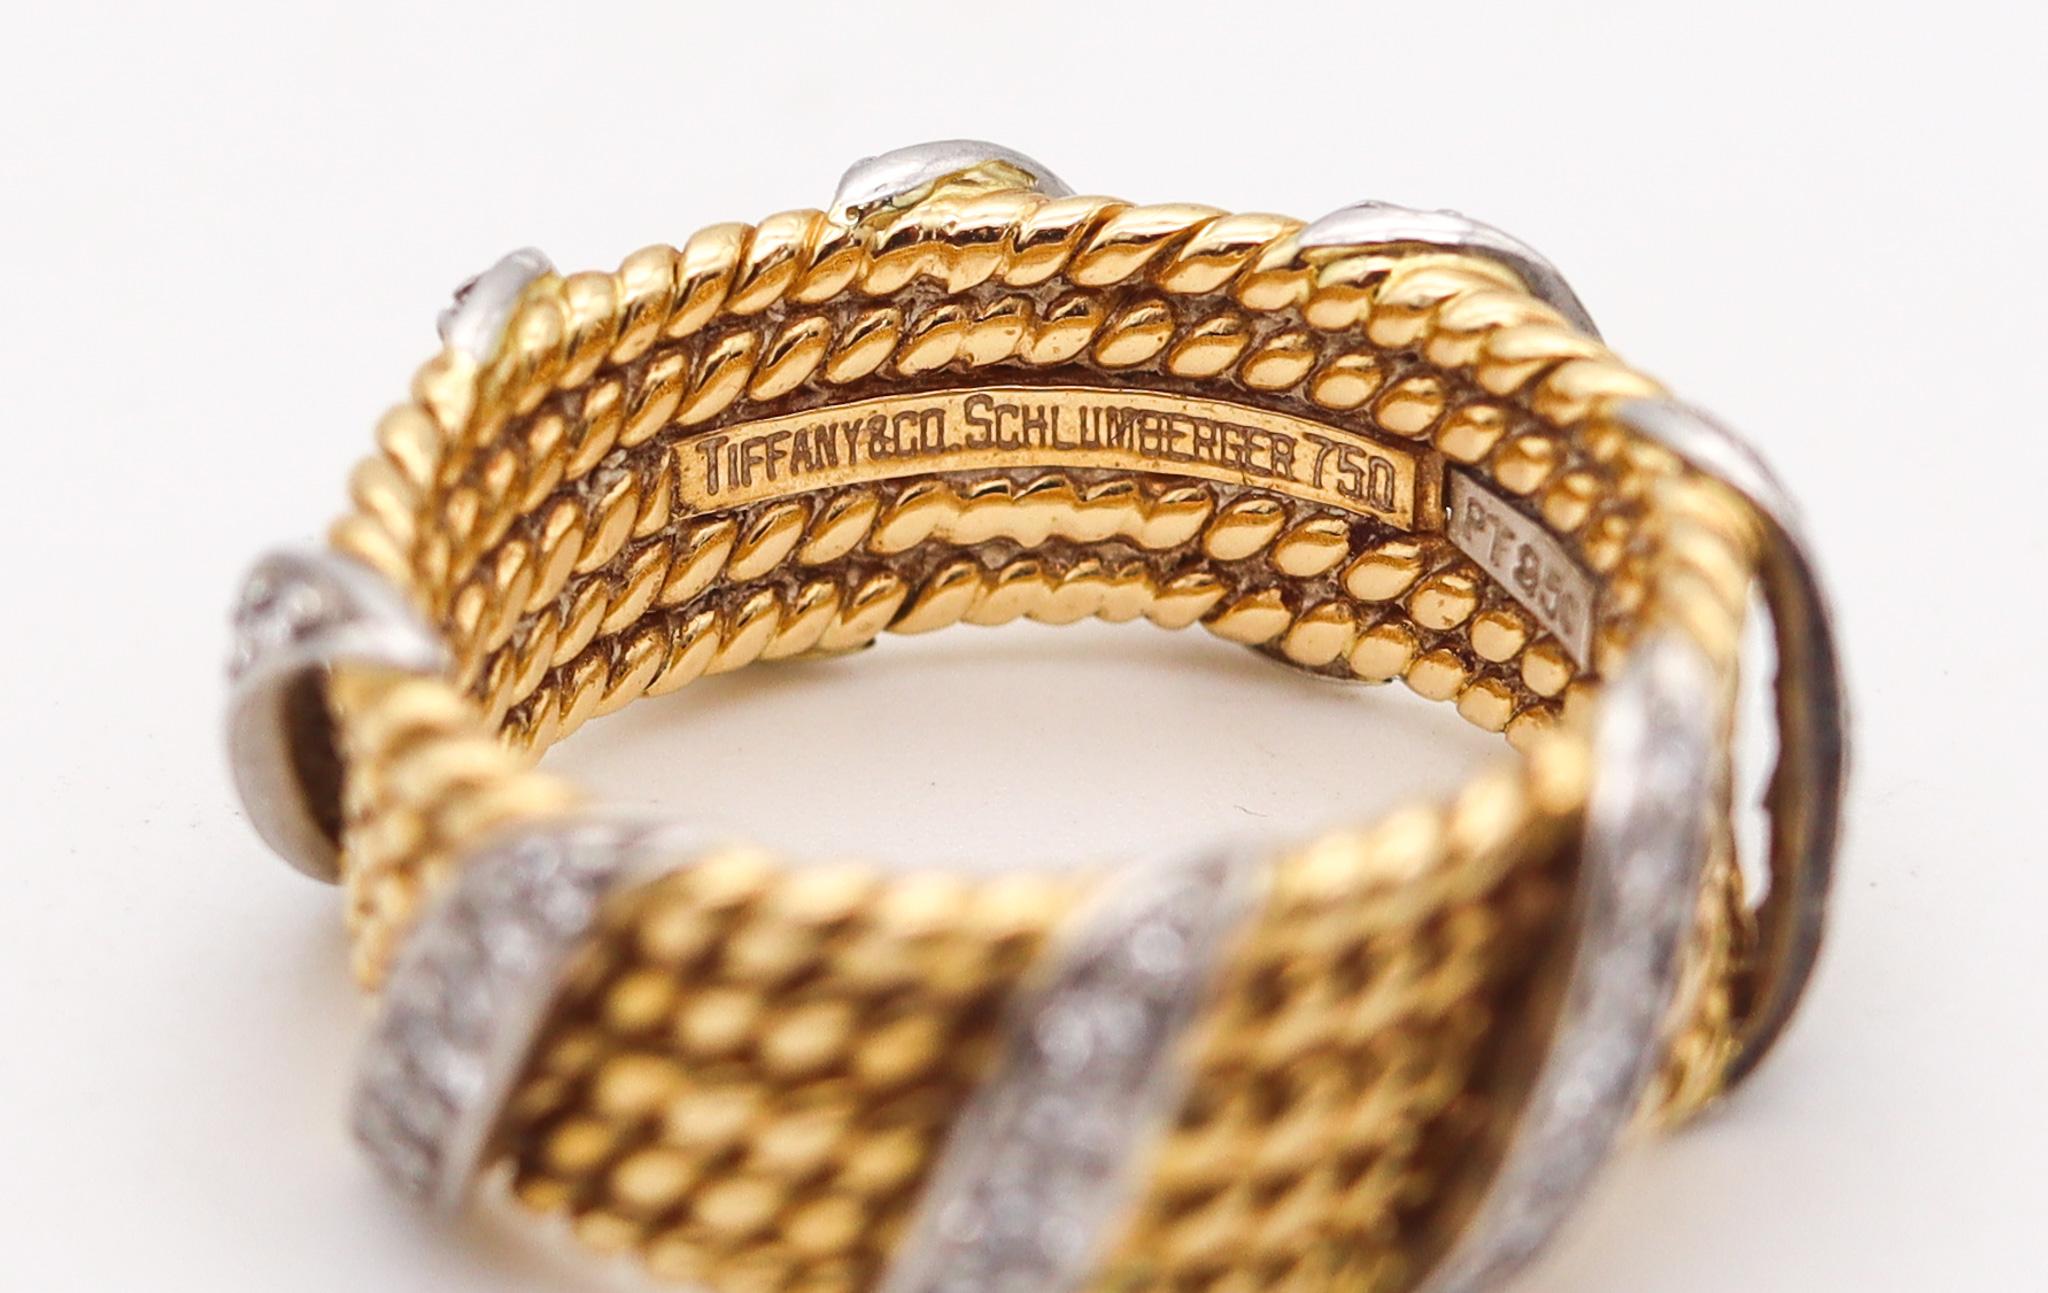 Modernist Tiffany & Co 1970 Jean Schlumberger Ring In 18Kt Gold And Platinum With Diamonds